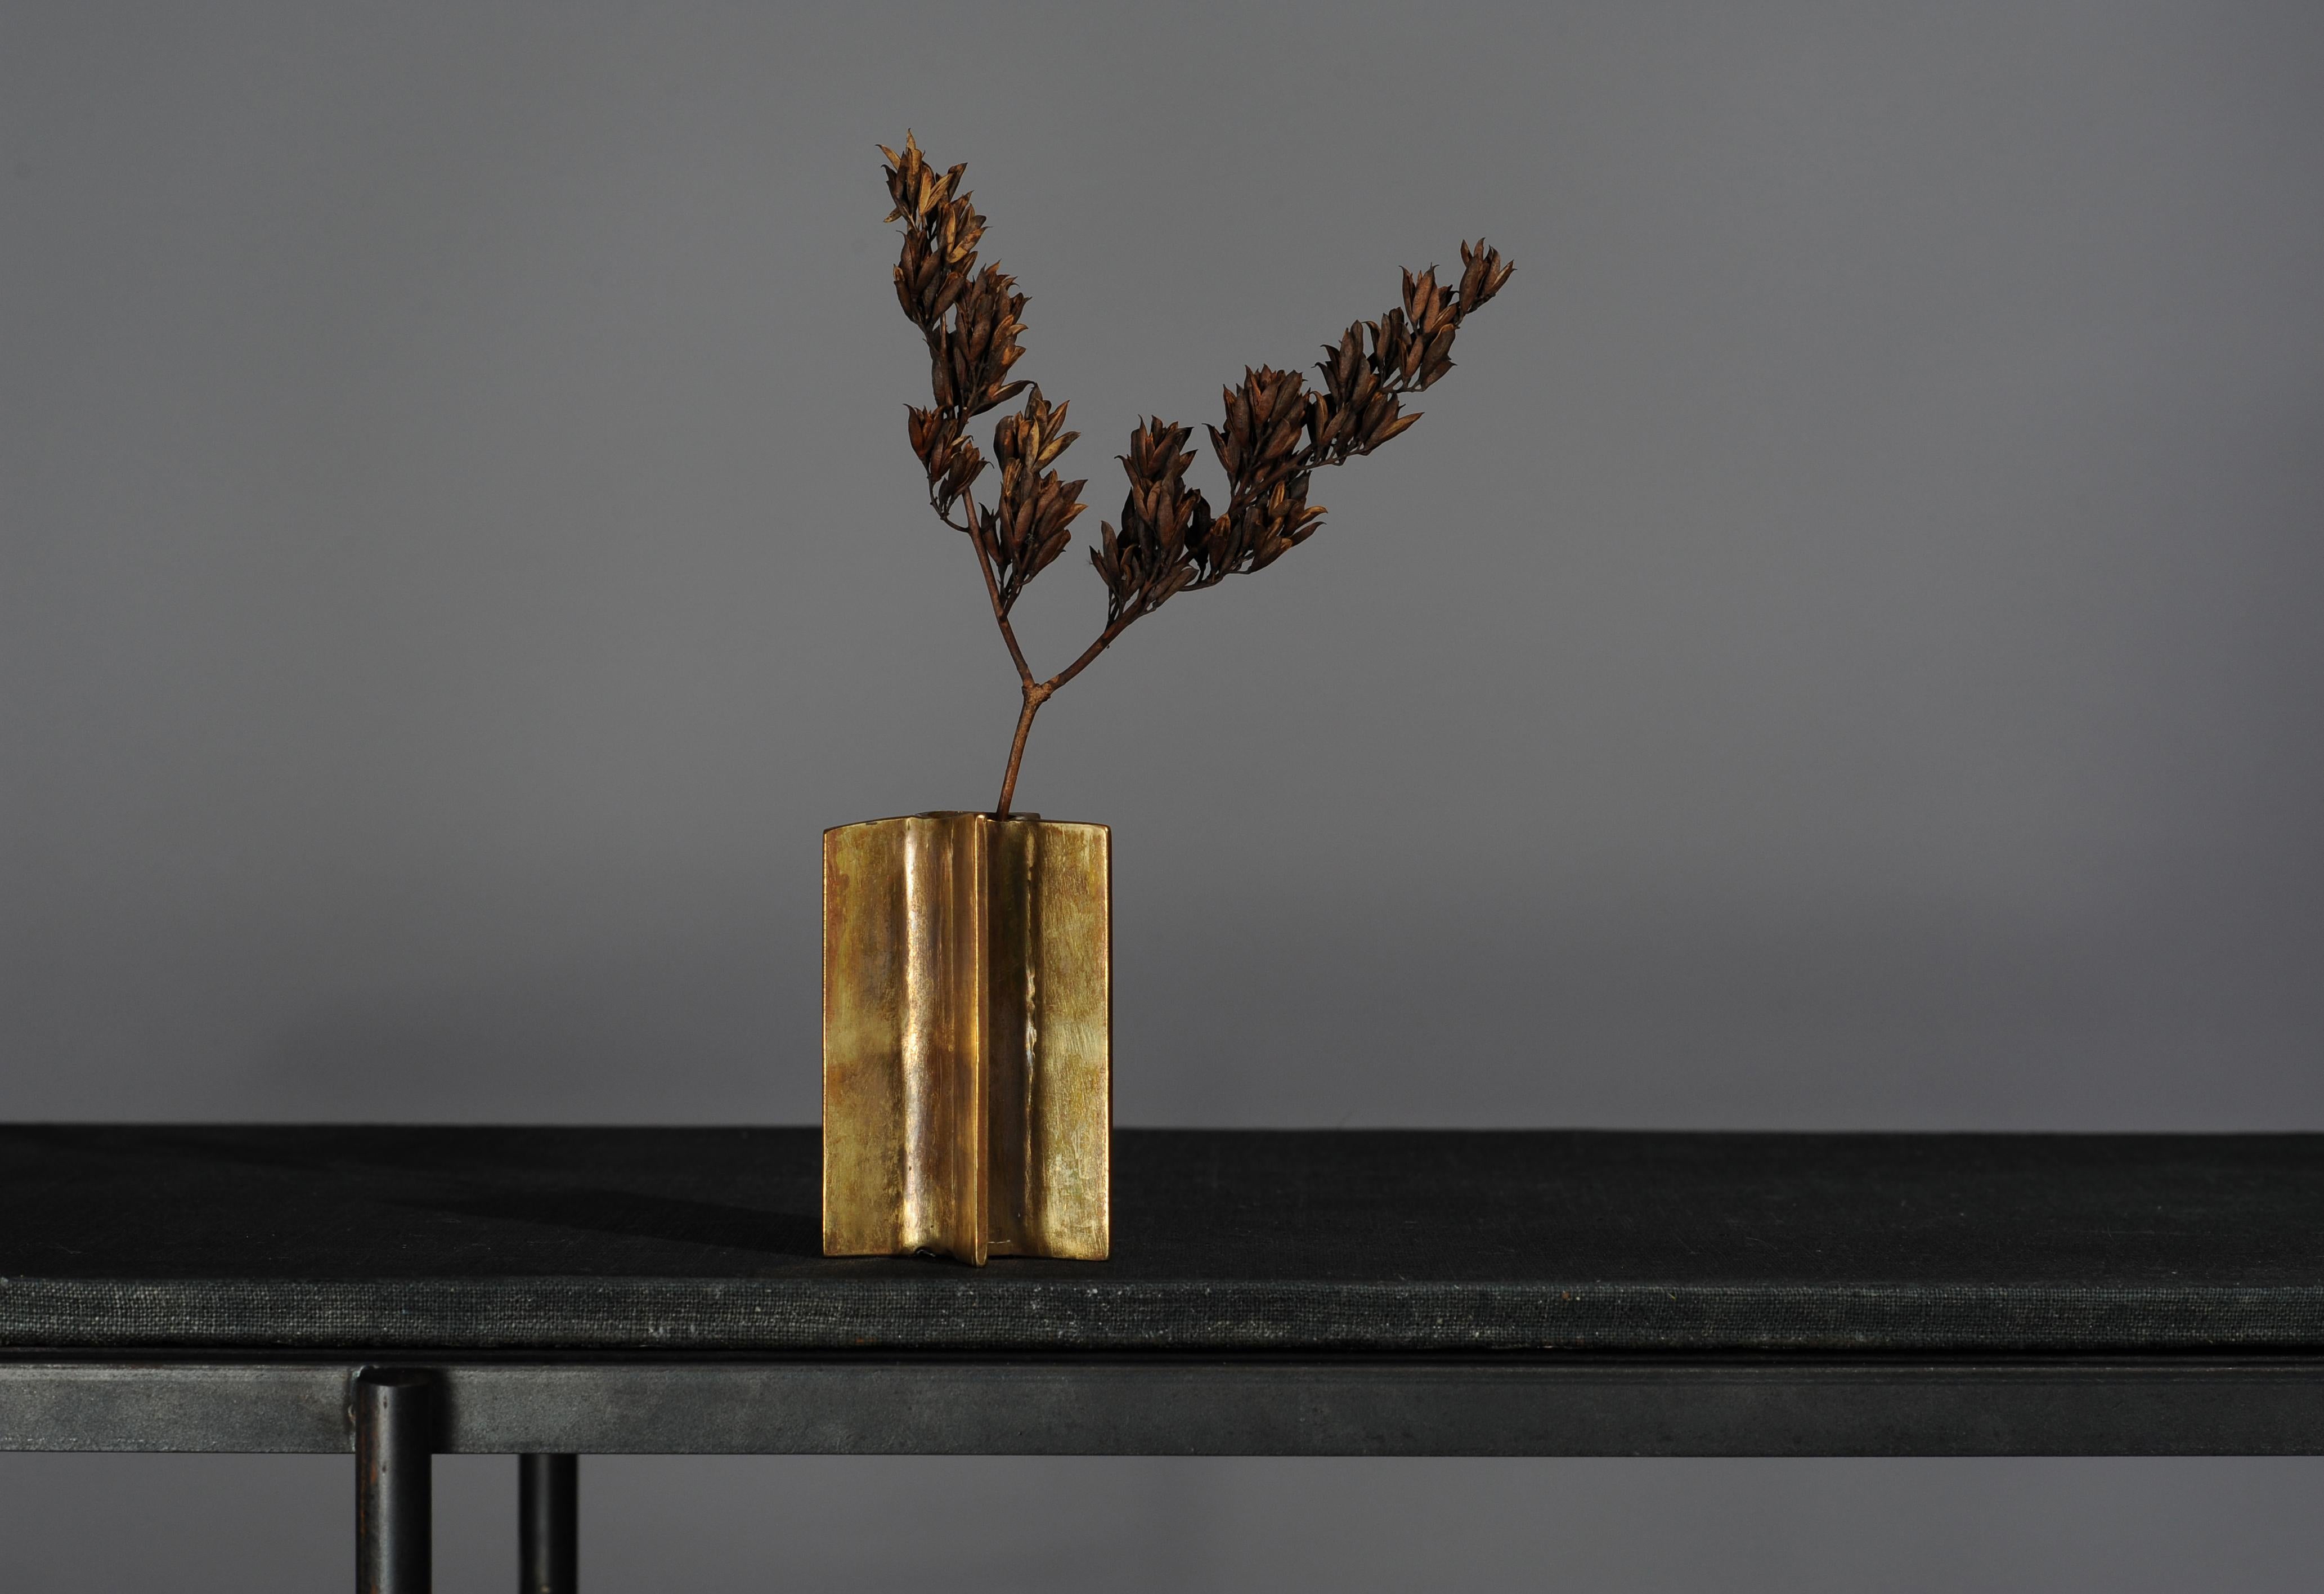 Unique brass vase, hand-sculpted and signed by Lukasz Friedrich
Brass vase 02, 2020
Patinated and polished brass
Dimensions:
H 10 cm
W 6 cm
D 6 cm
Signed and dated.